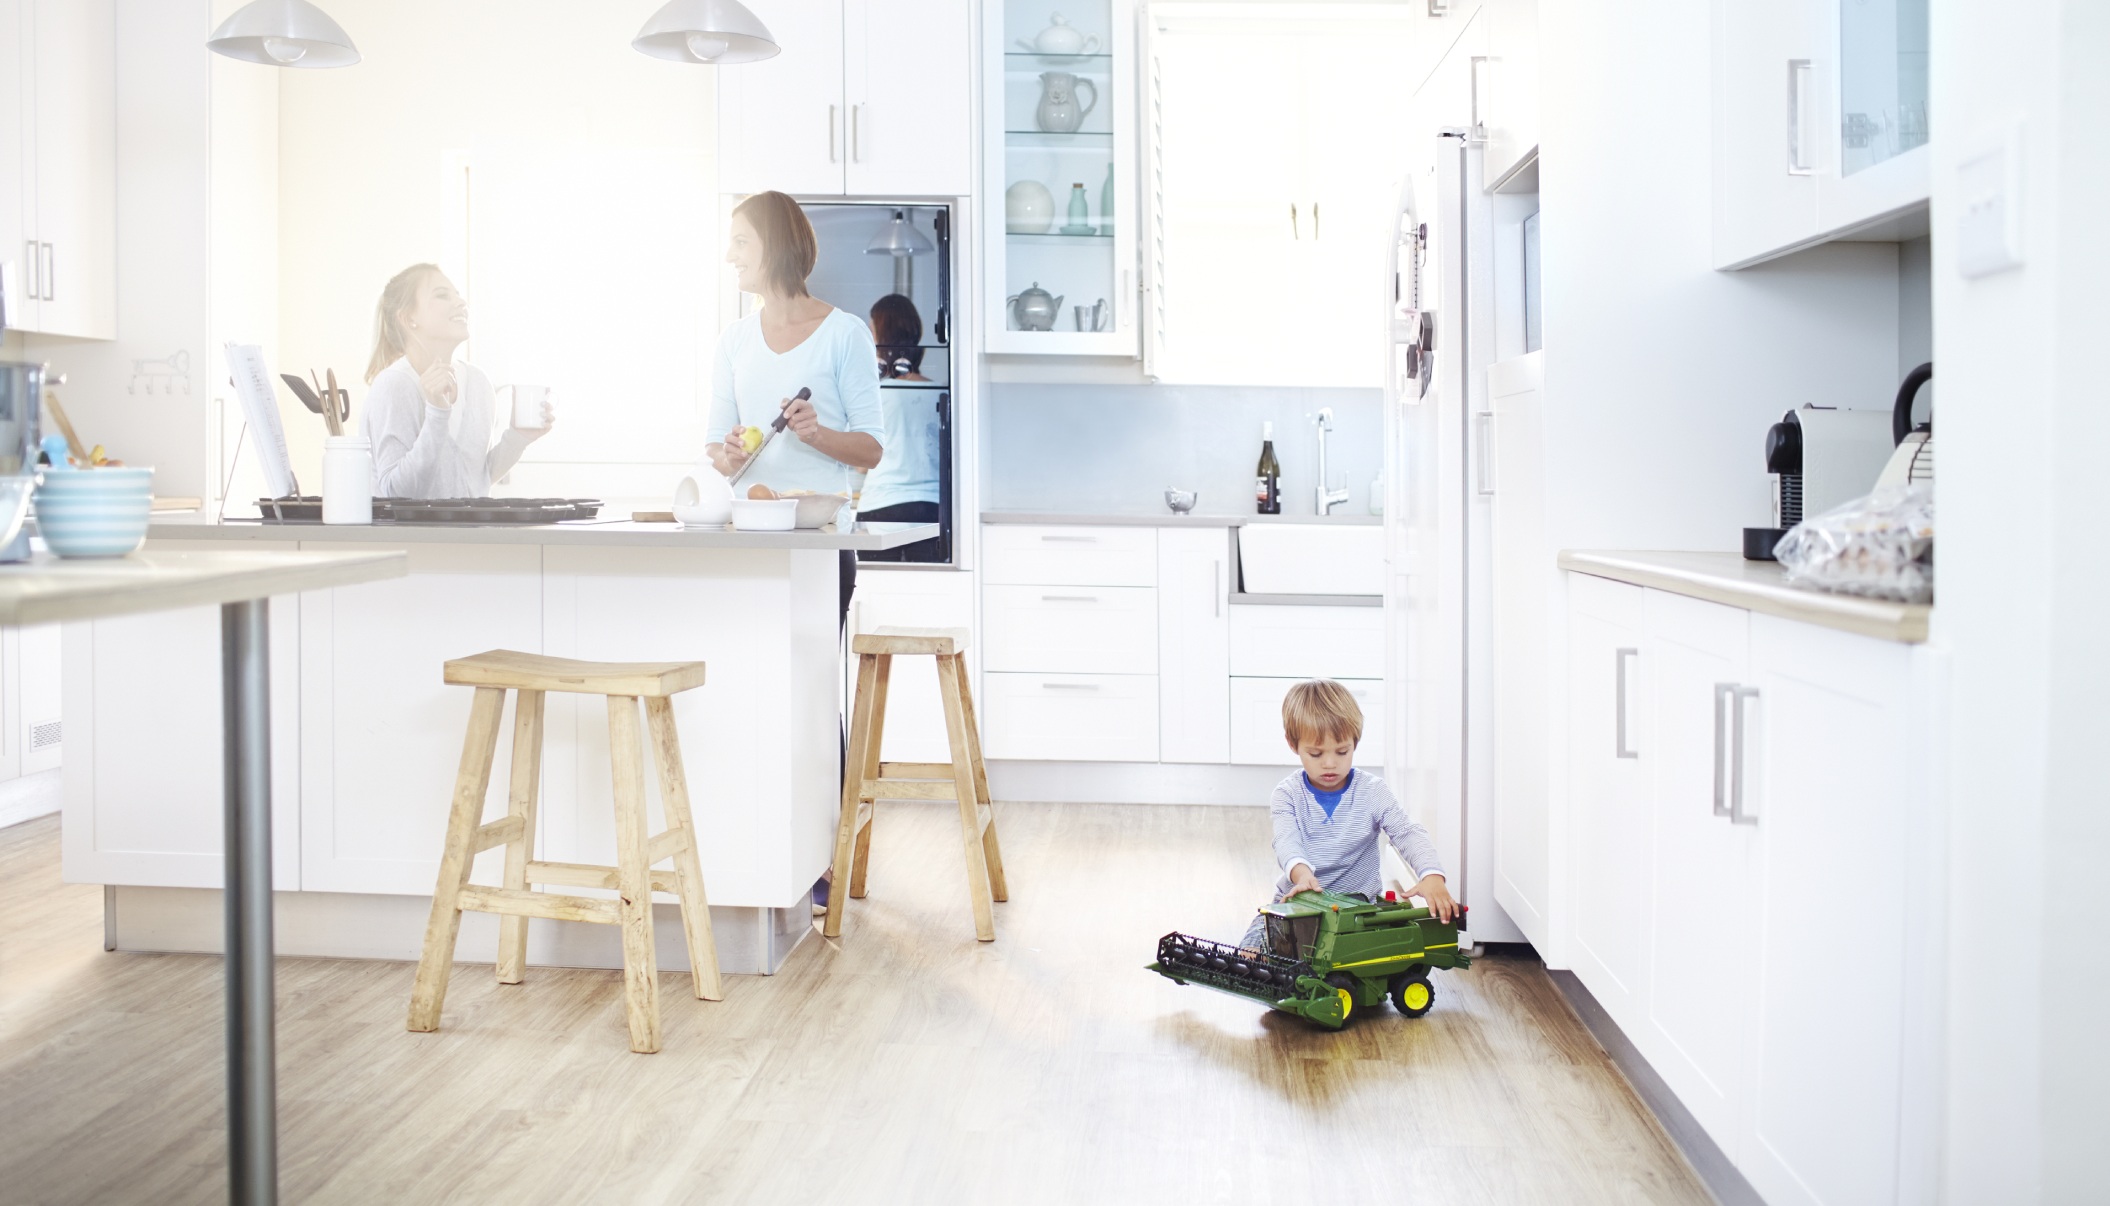 Indoor air pollutants sources can be found in kitchens 